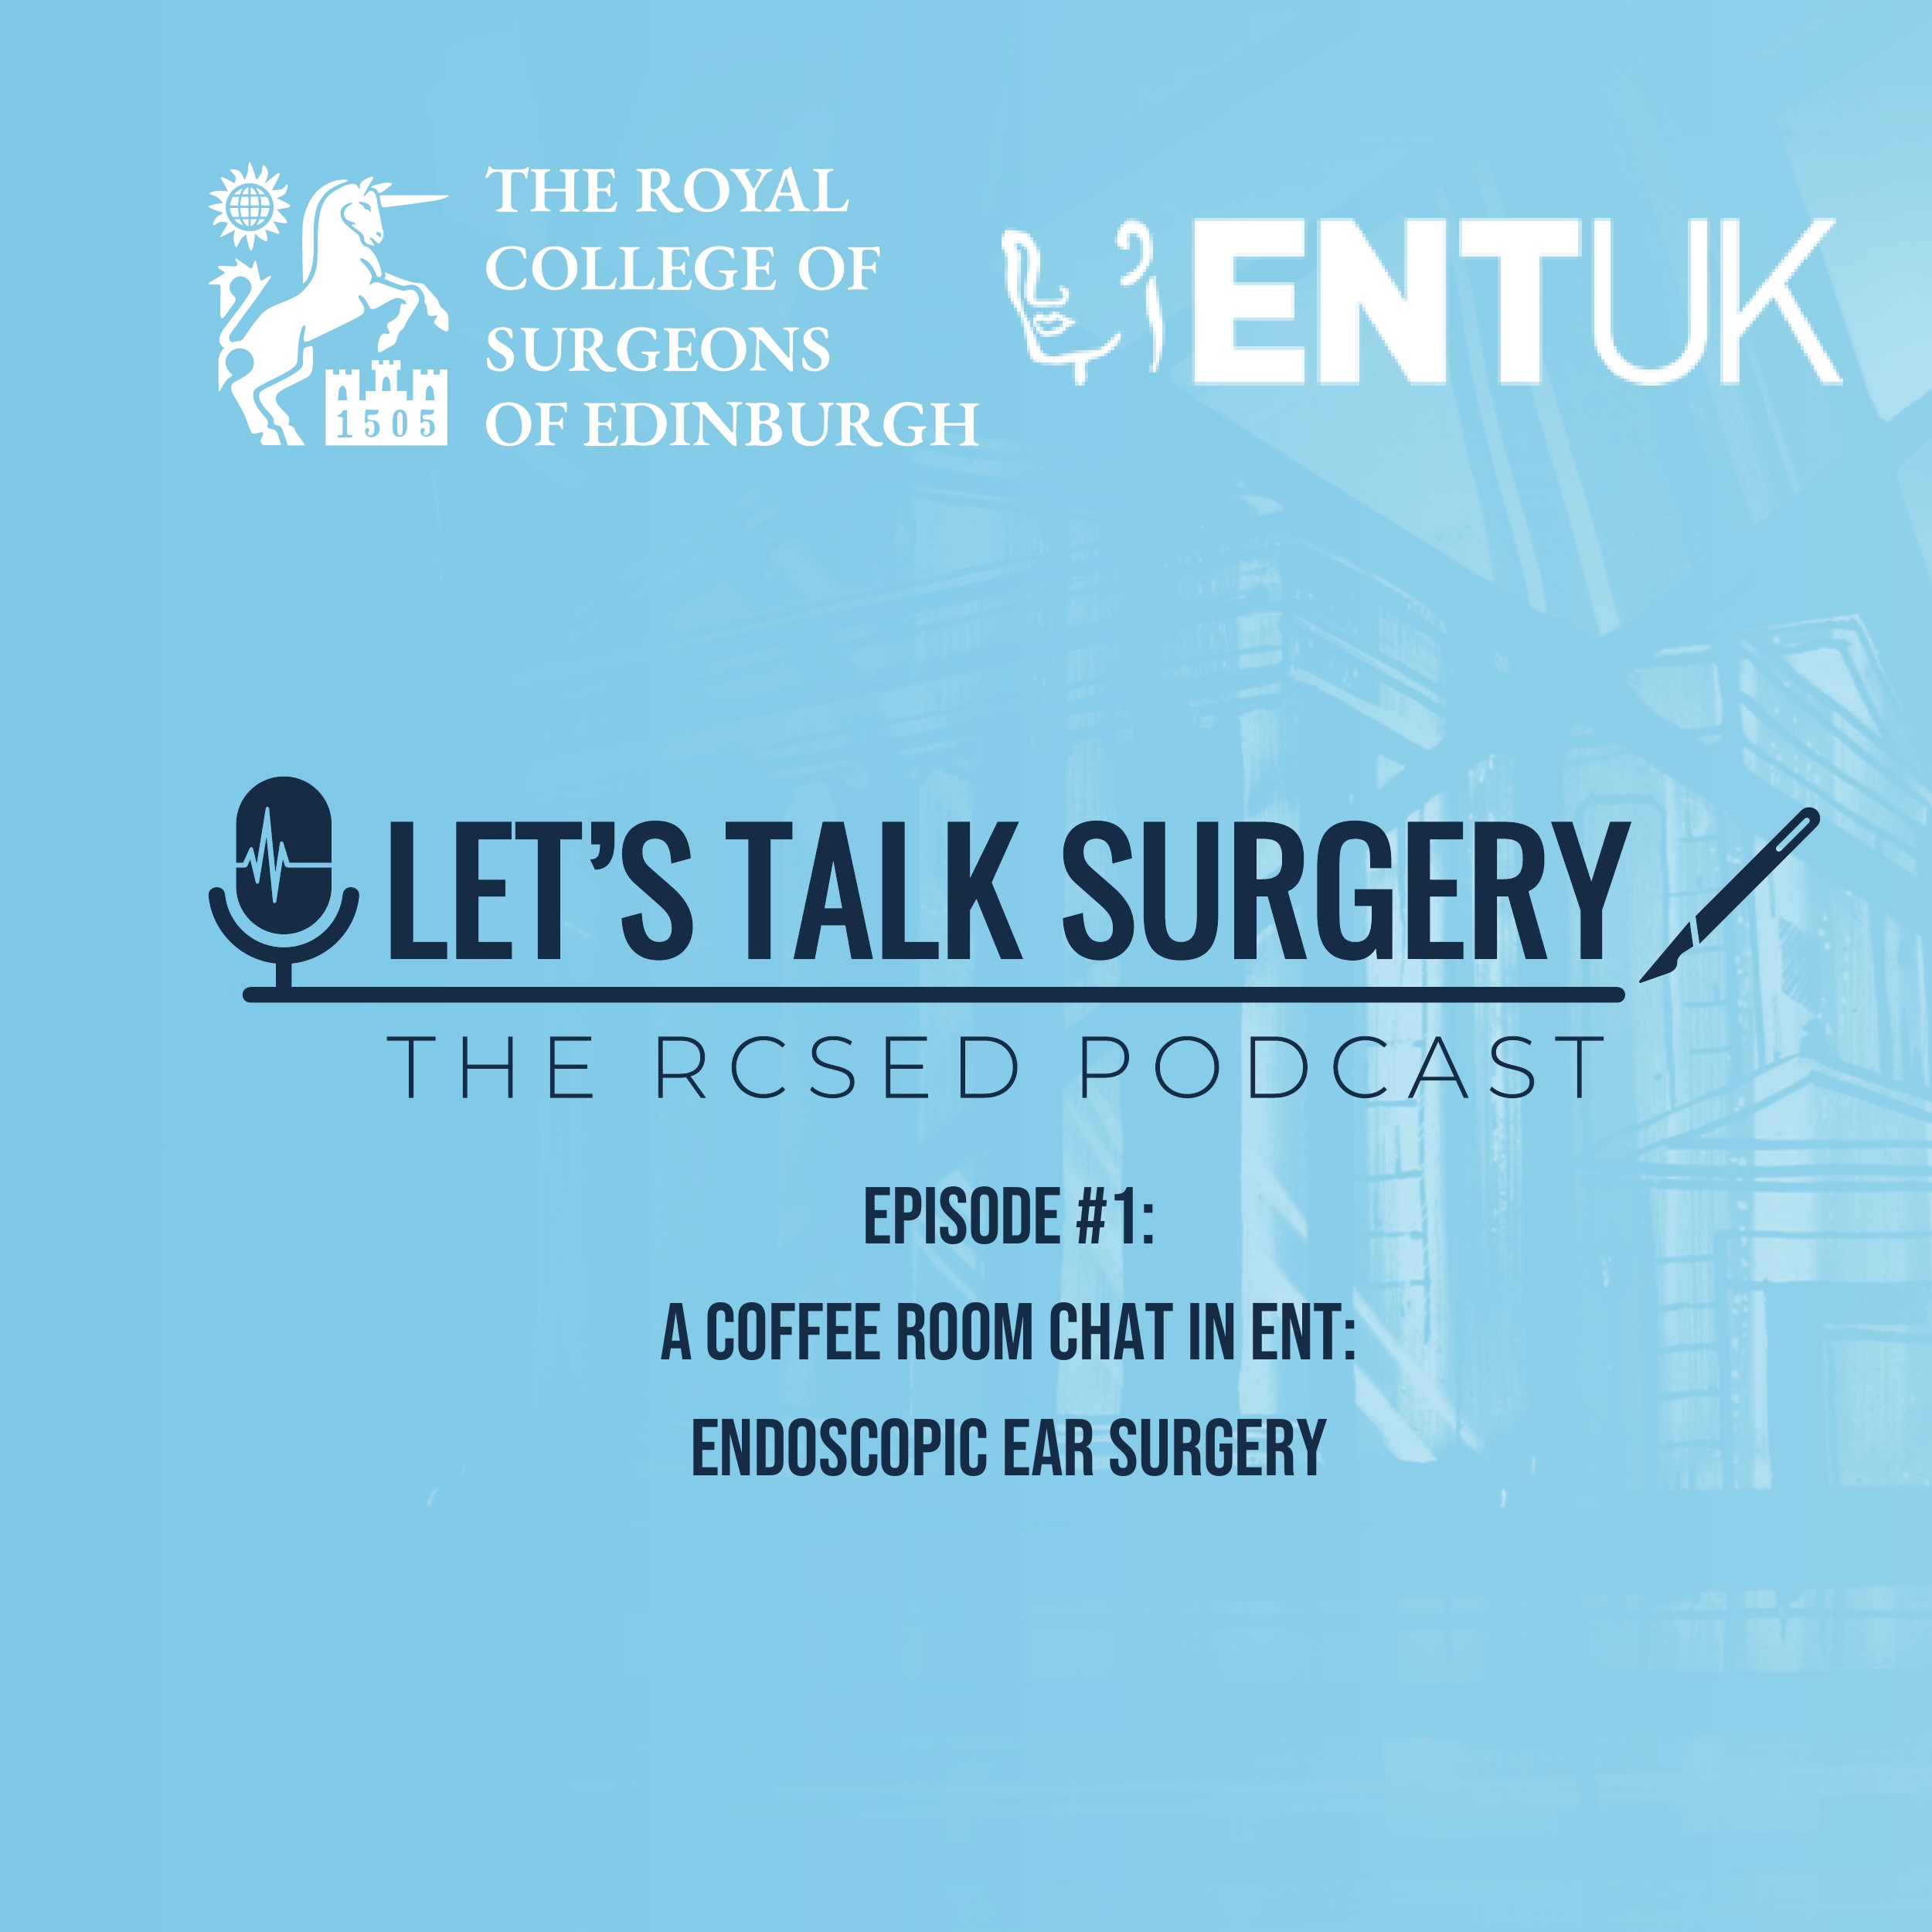 A Coffee Room Chat in ENT: Endoscopic Ear Surgery